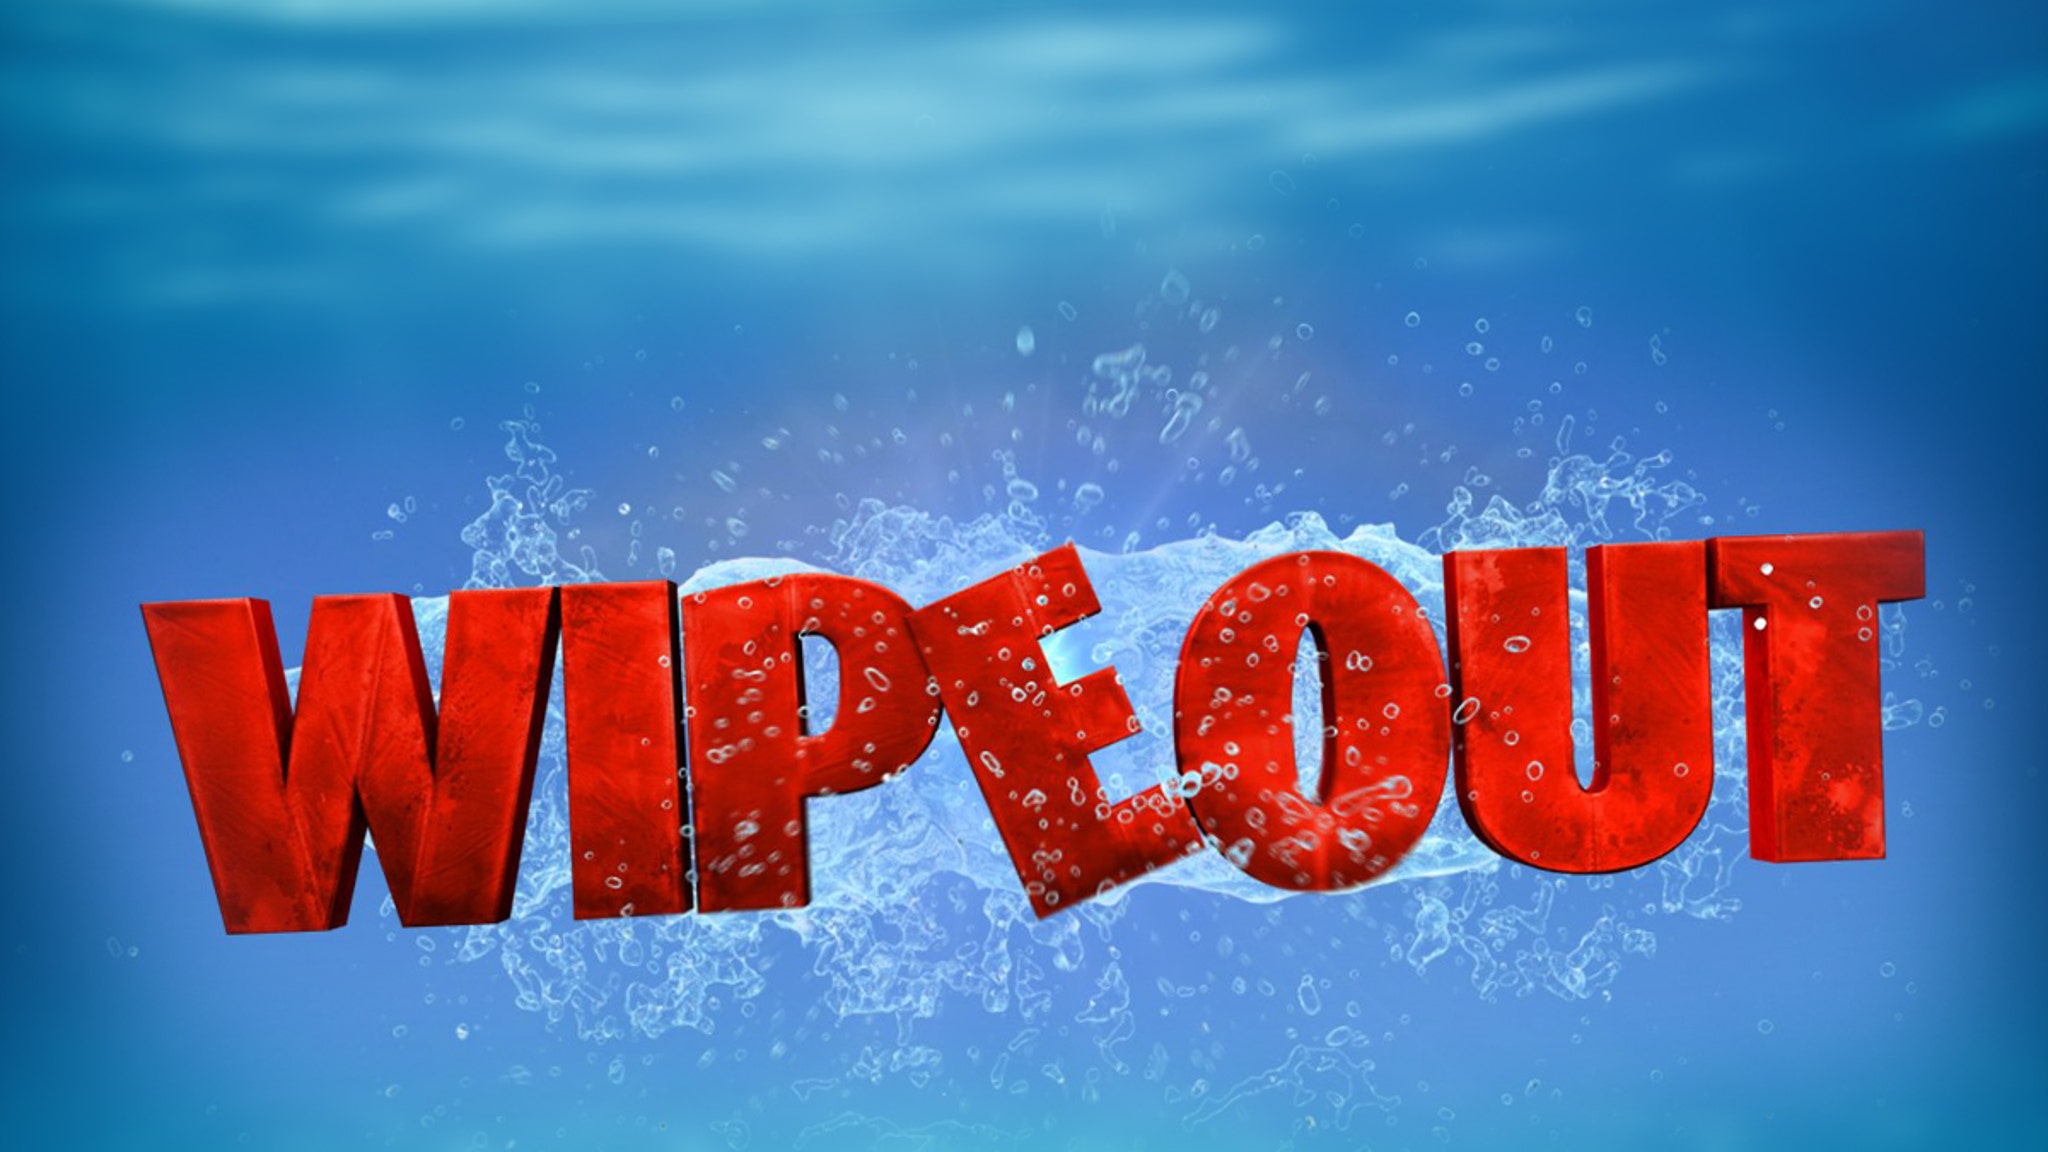 Participant in ‘Wipeout’ dies of a heart attack, after completing the course